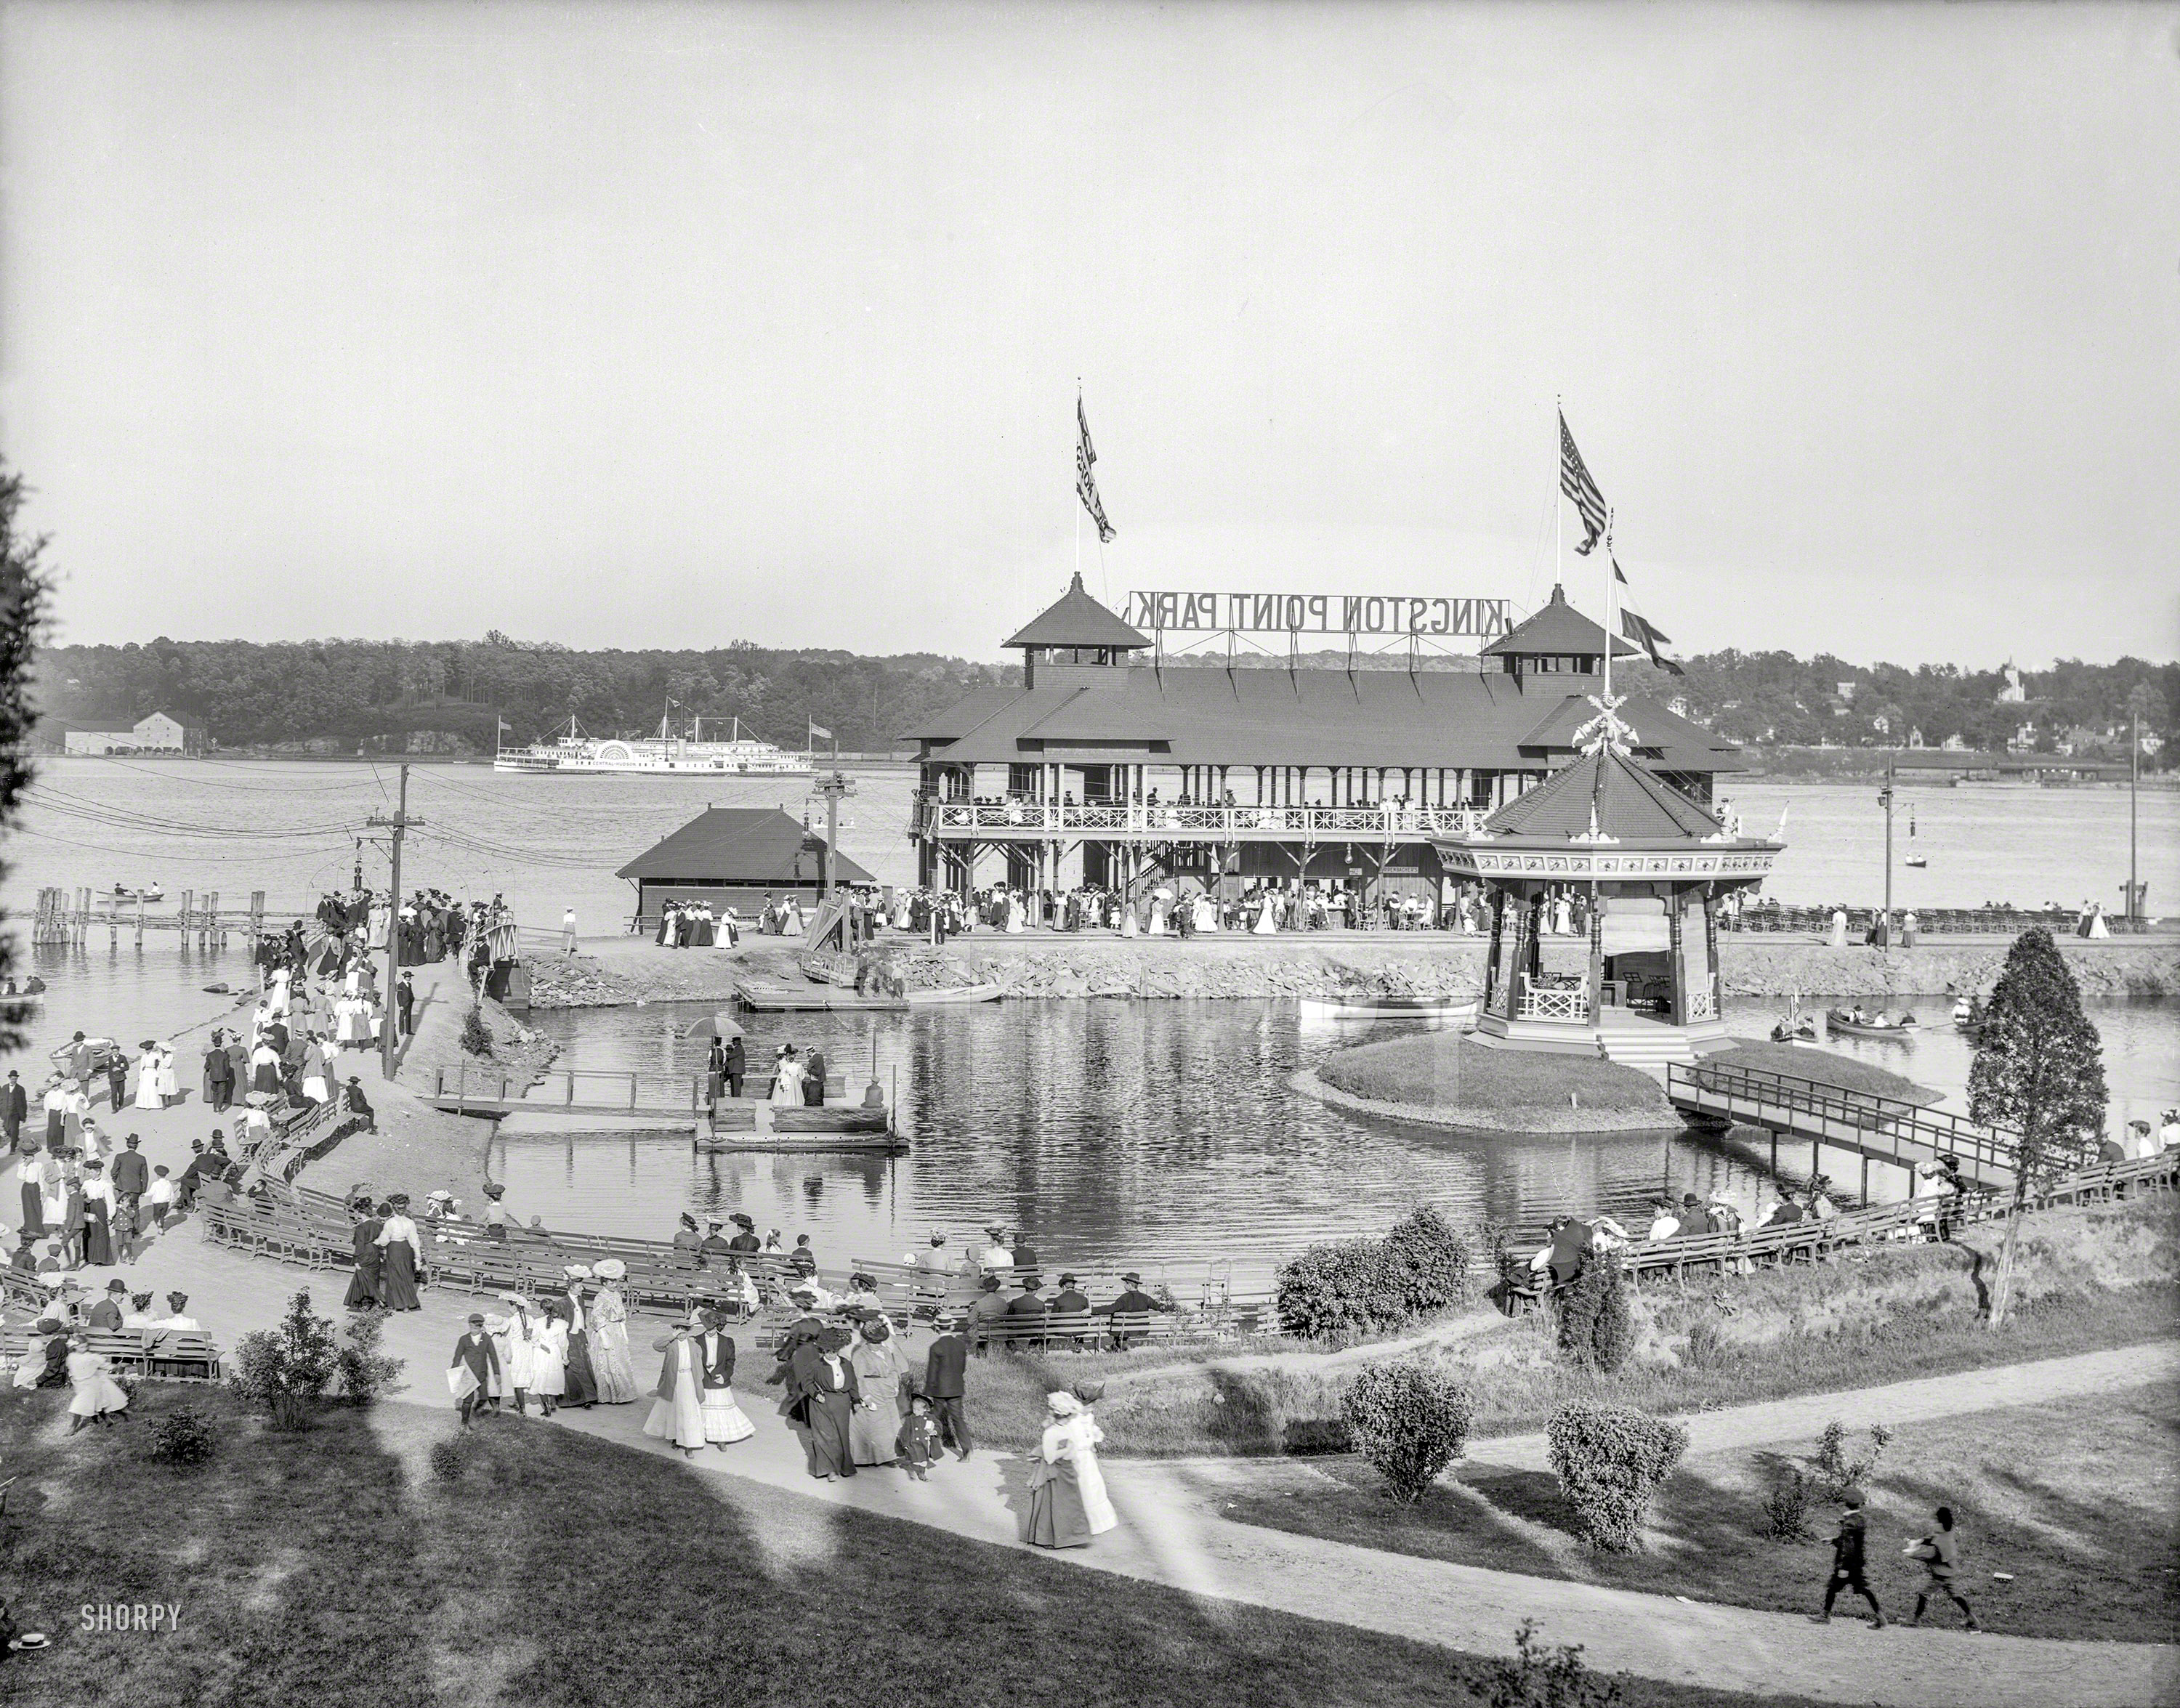 1906. "Kingston Point Park, Kingston, New York." A grand day out on the Hudson River. 8x10 inch glass negative, Detroit Publishing Company. View full size.